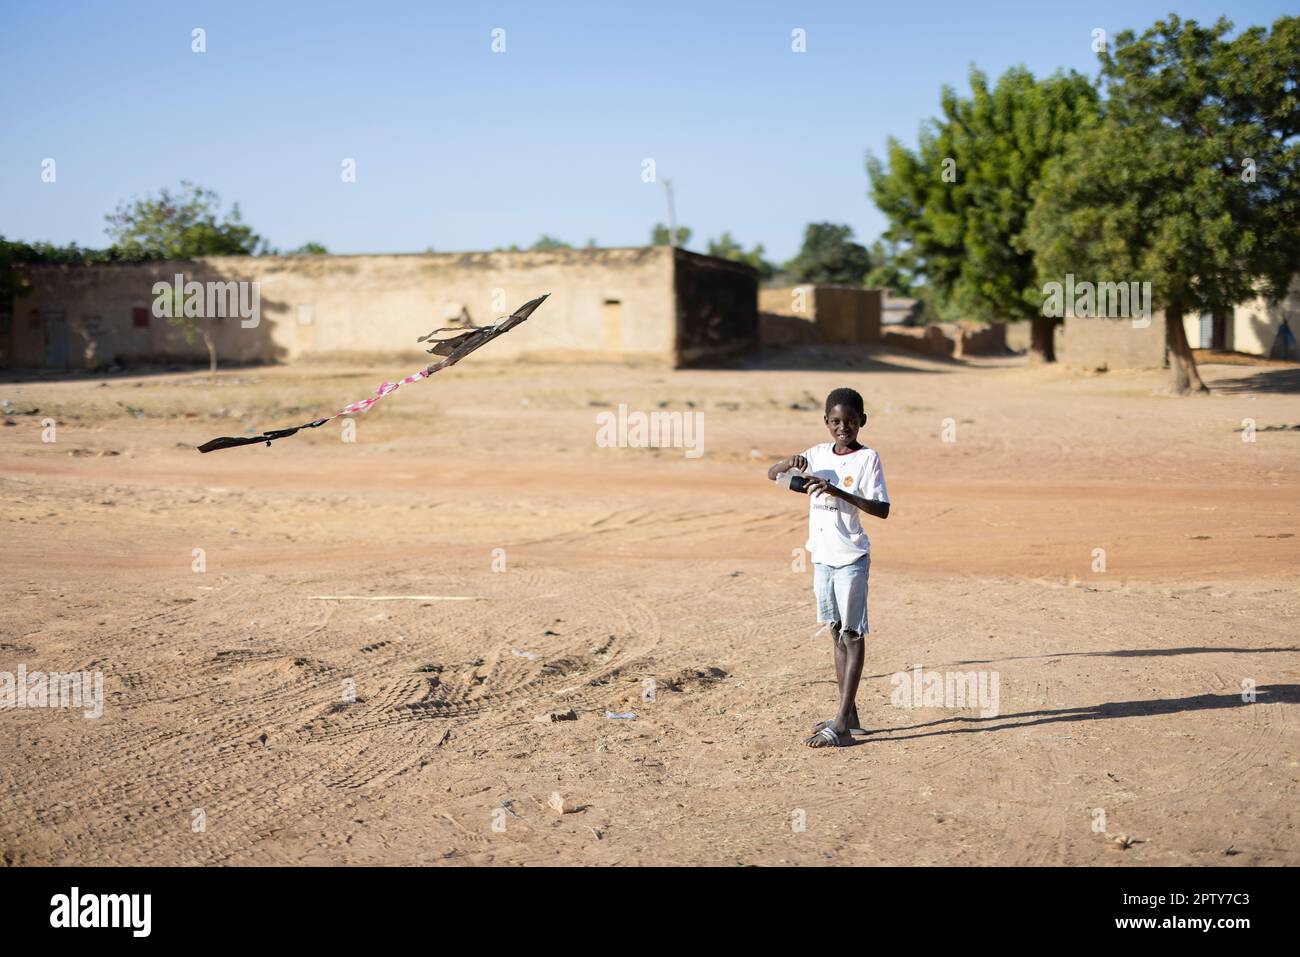 A young boy flies a homemade kite, made from plastic bags, in Segou Region, Mali, West Africa. 2022 Mali drought and hunger crisis. Stock Photo